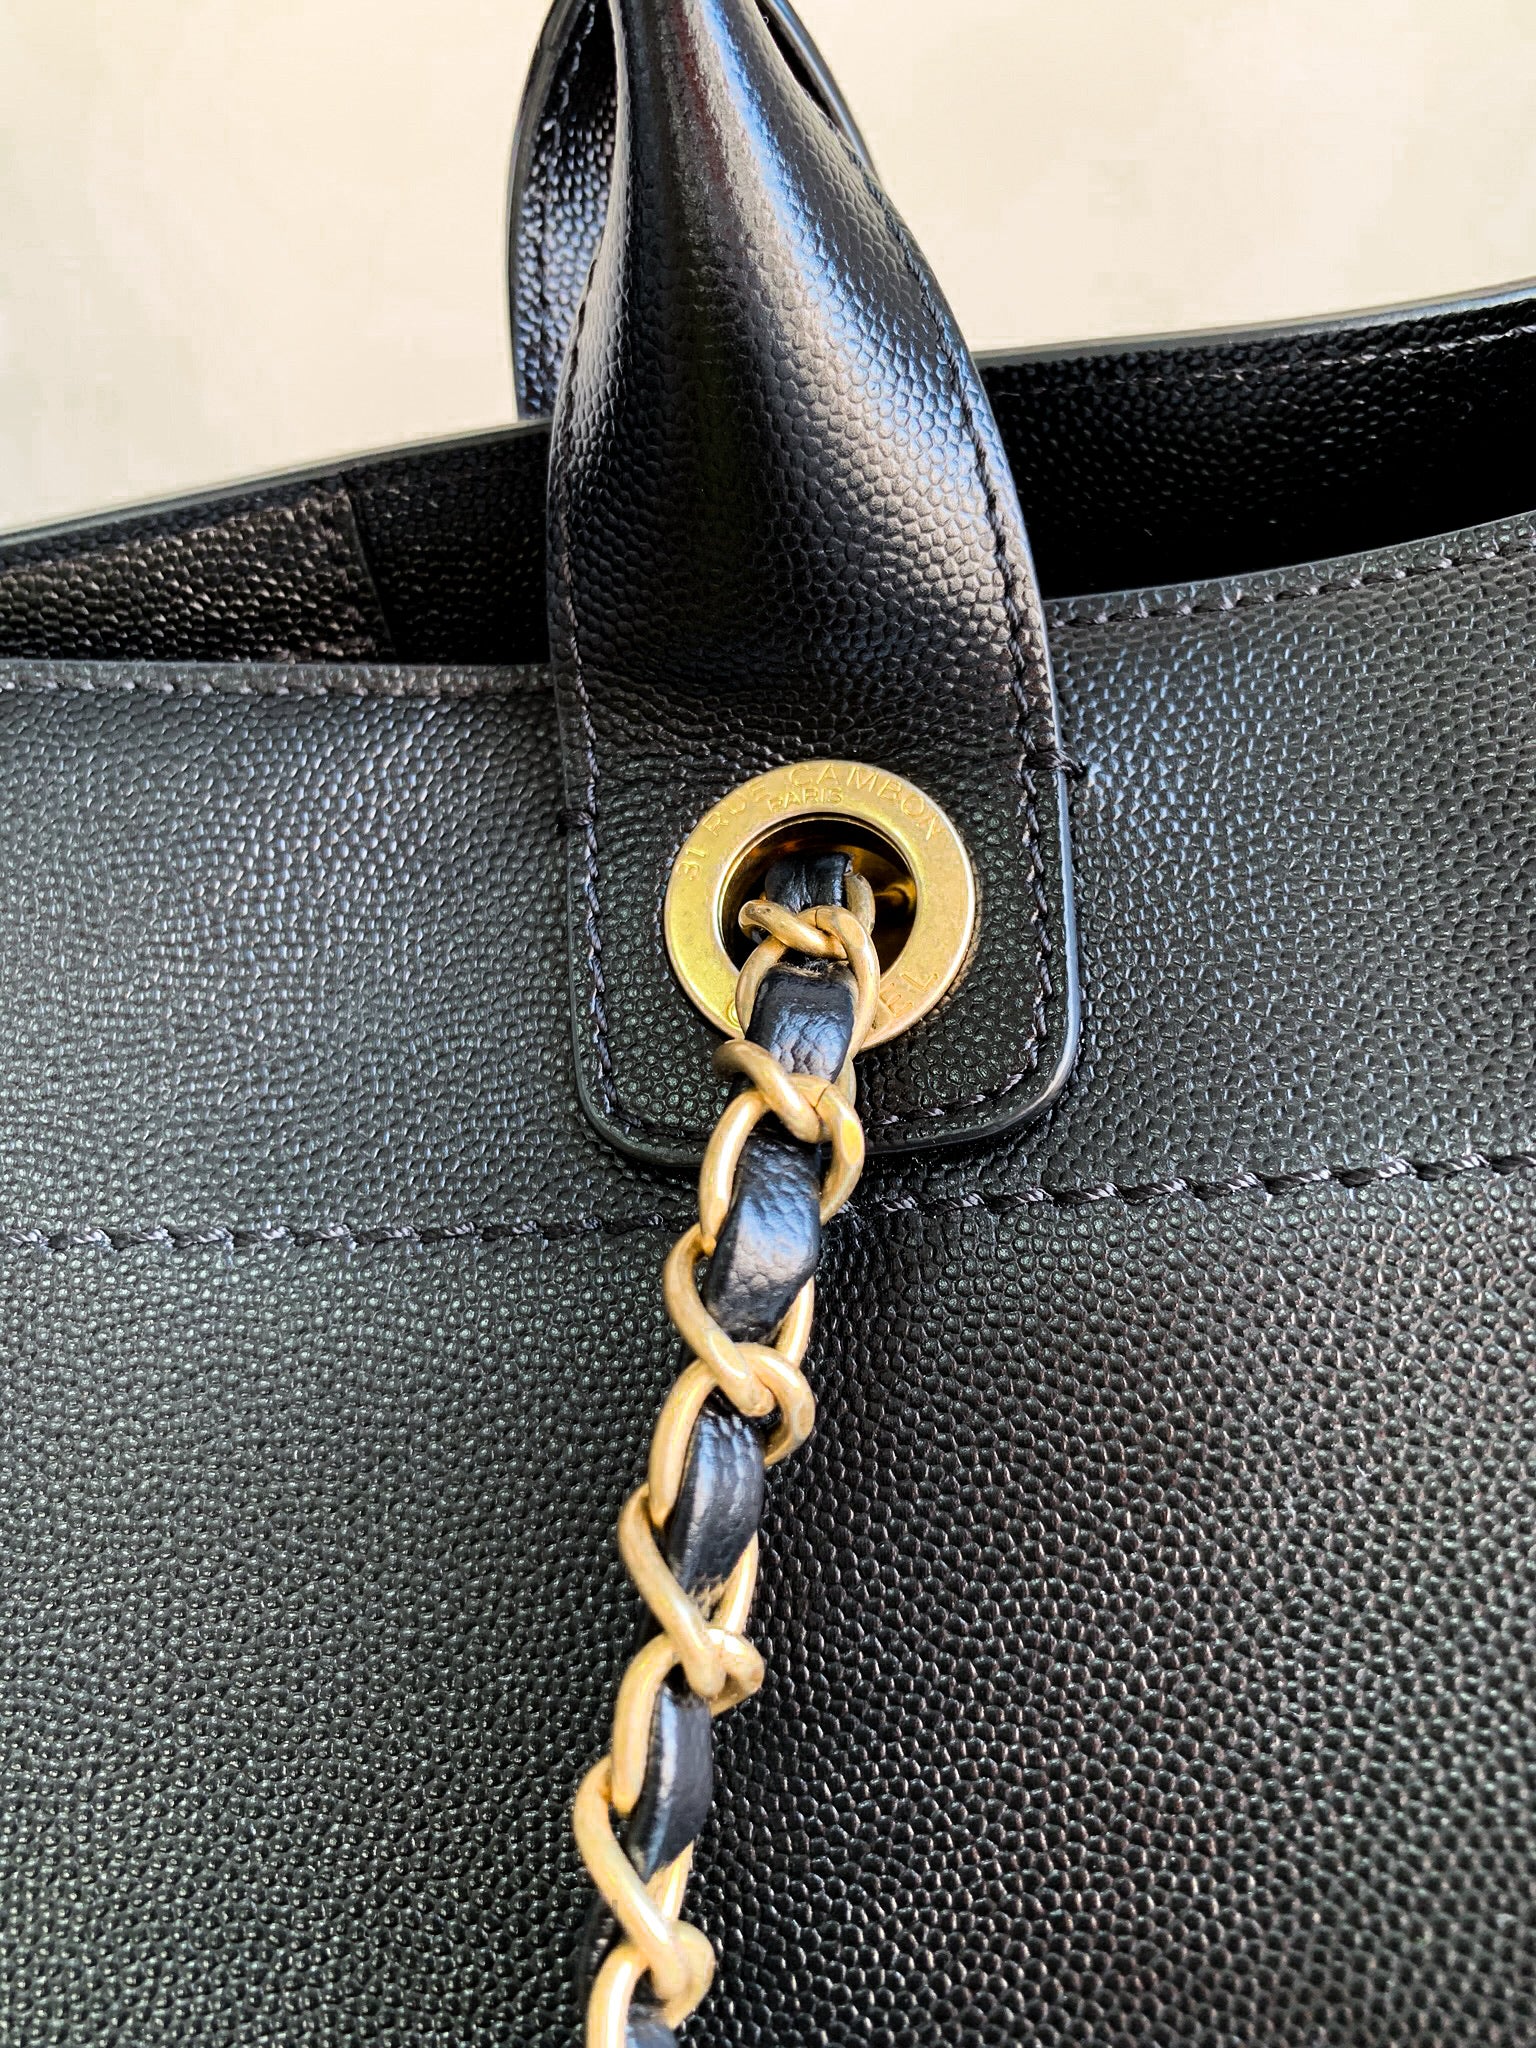 Chanel Black Caviar Leather Small Studded Deauville Tote Chanel